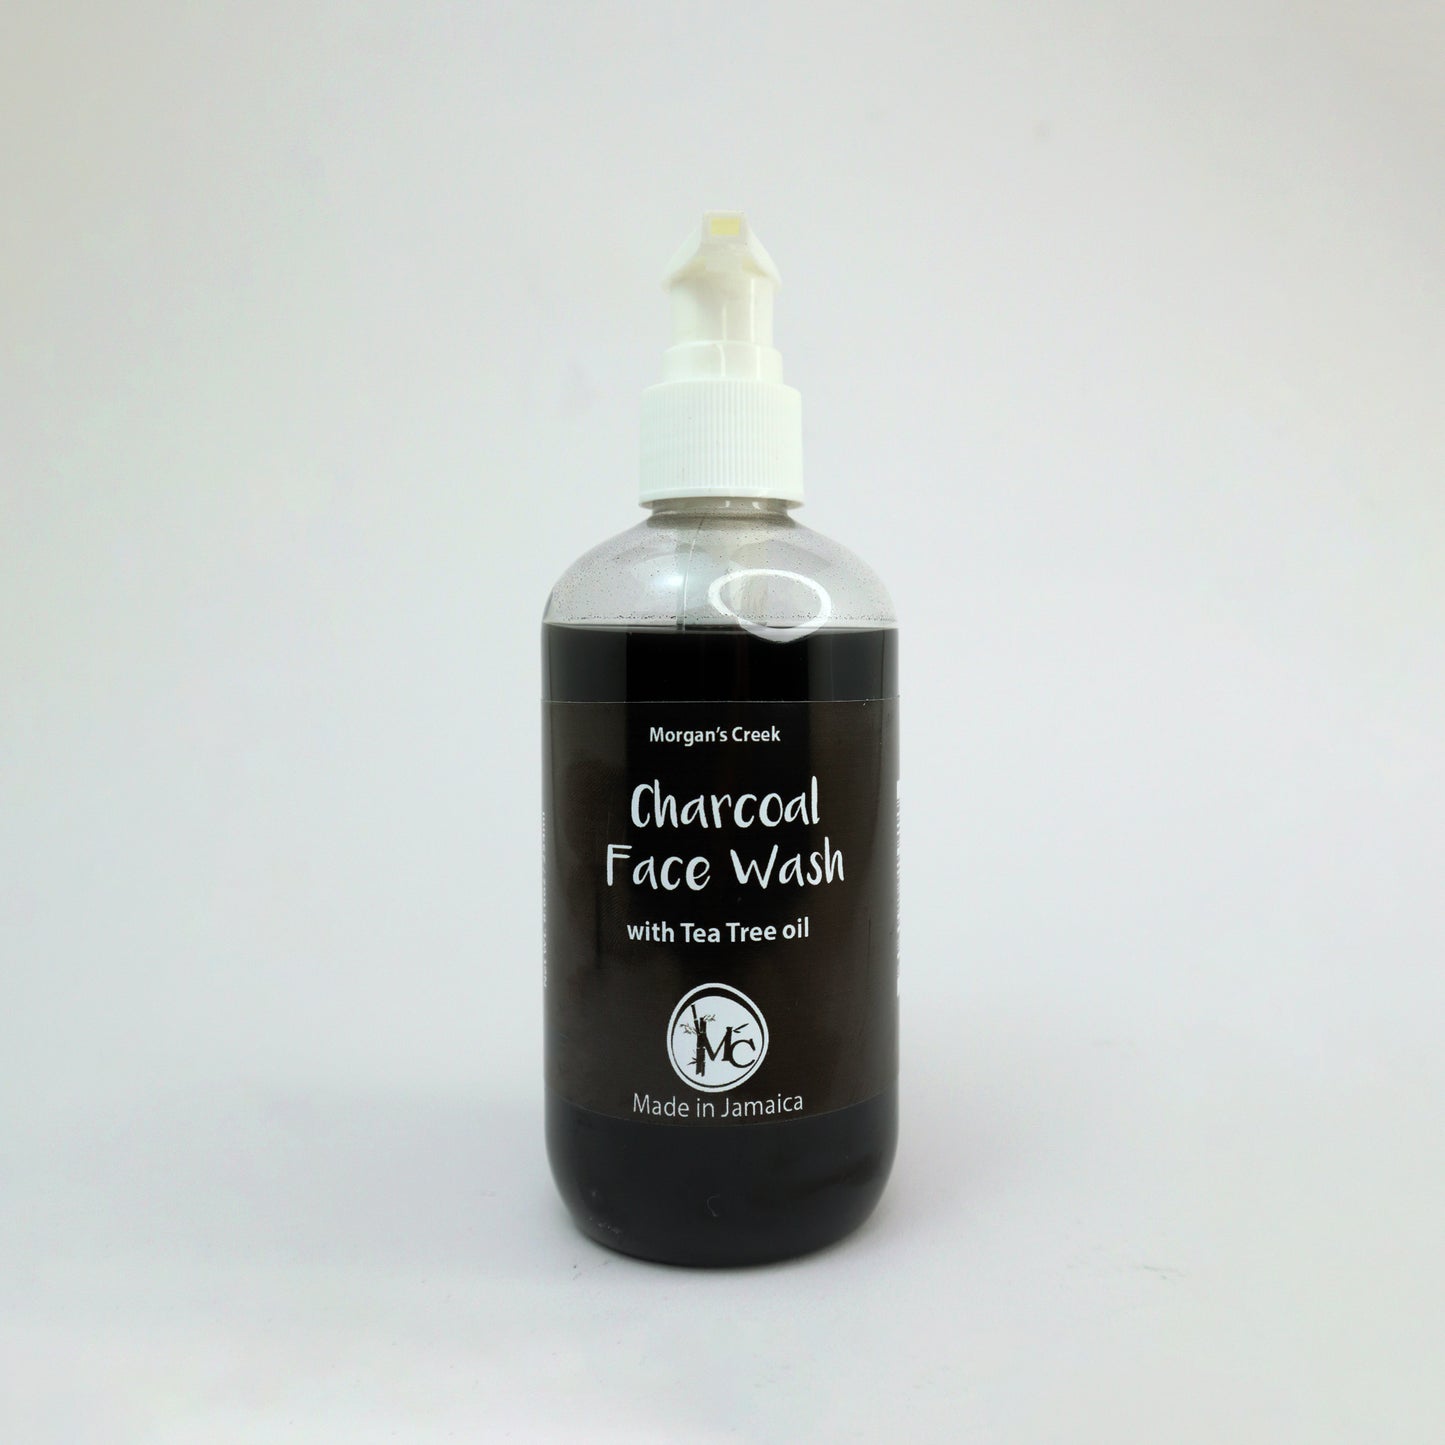 Charcoal Face Wash with Tea Tree Oil by Morgan's Creek